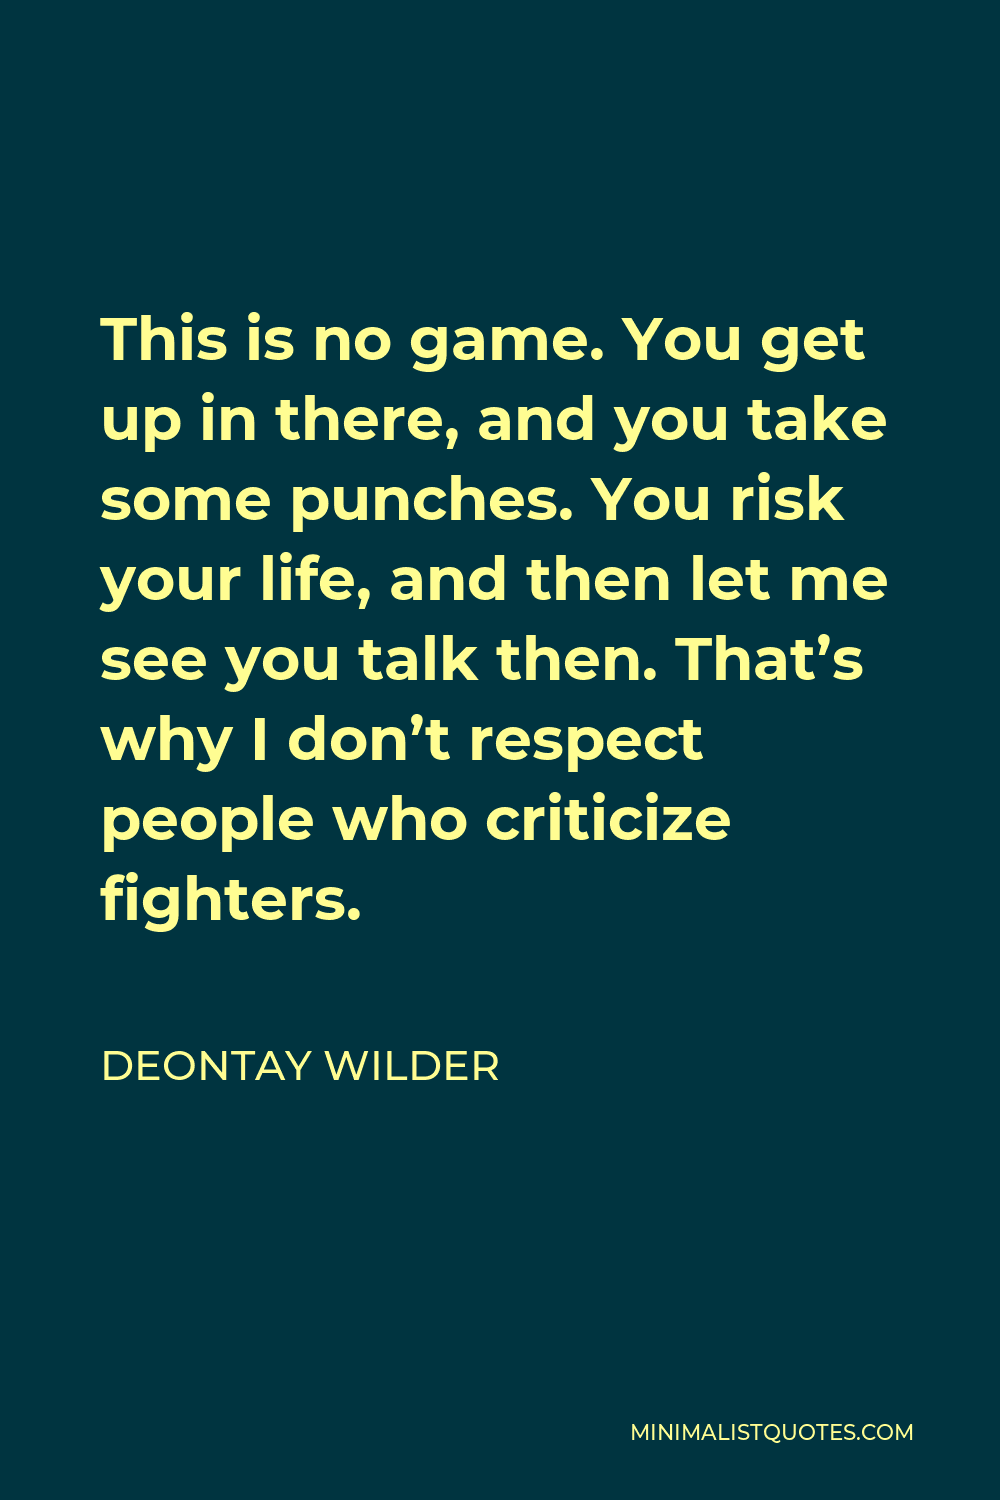 Deontay Wilder Quote - This is no game. You get up in there, and you take some punches. You risk your life, and then let me see you talk then. That’s why I don’t respect people who criticize fighters.